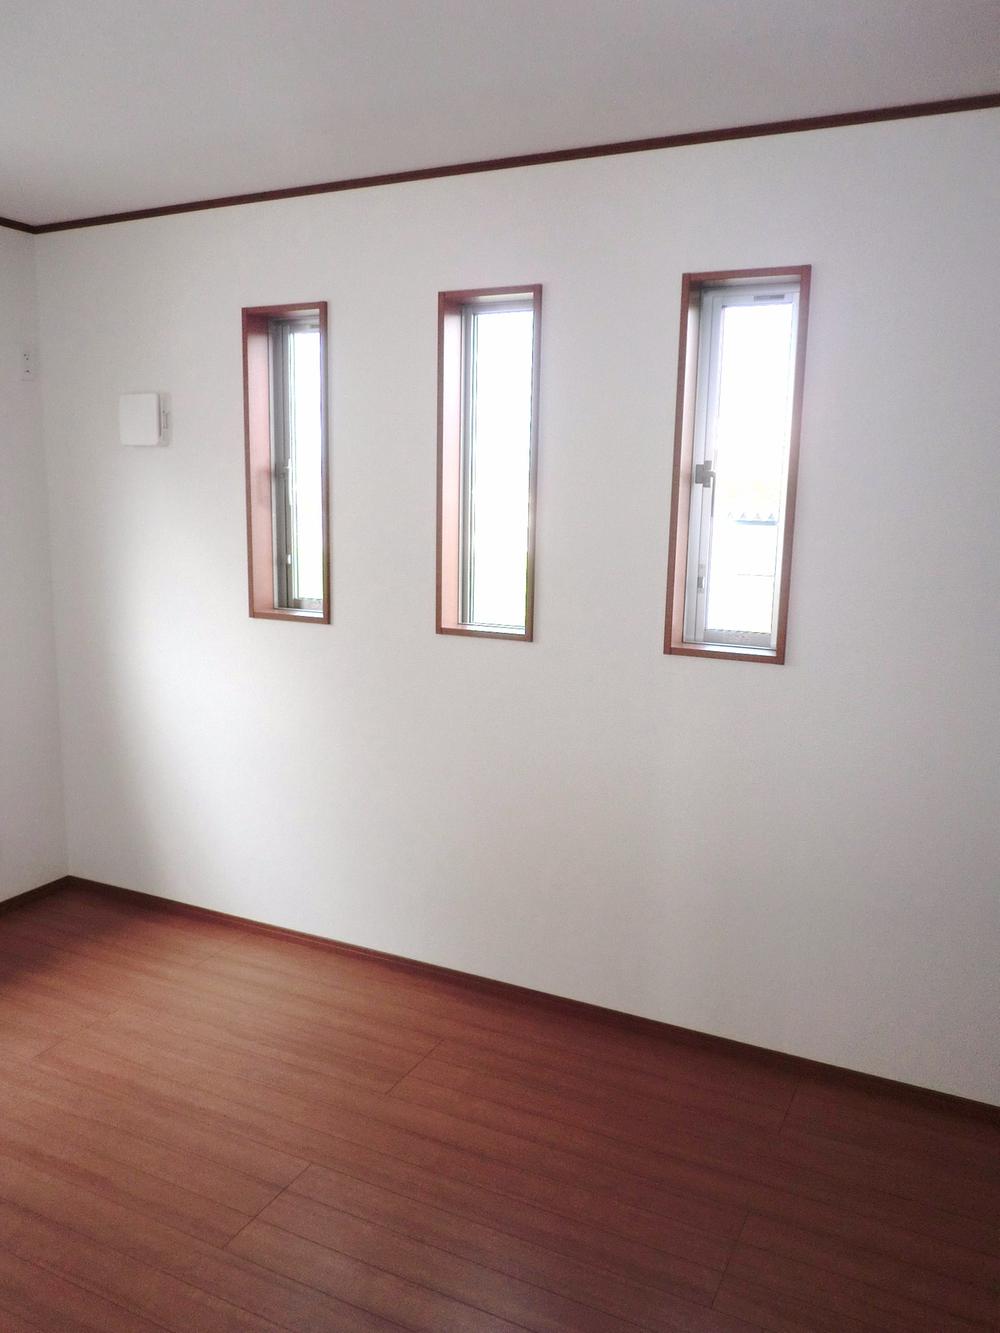 Non-living room. Triple window of 2 Kainushi bedroom is accented rooms